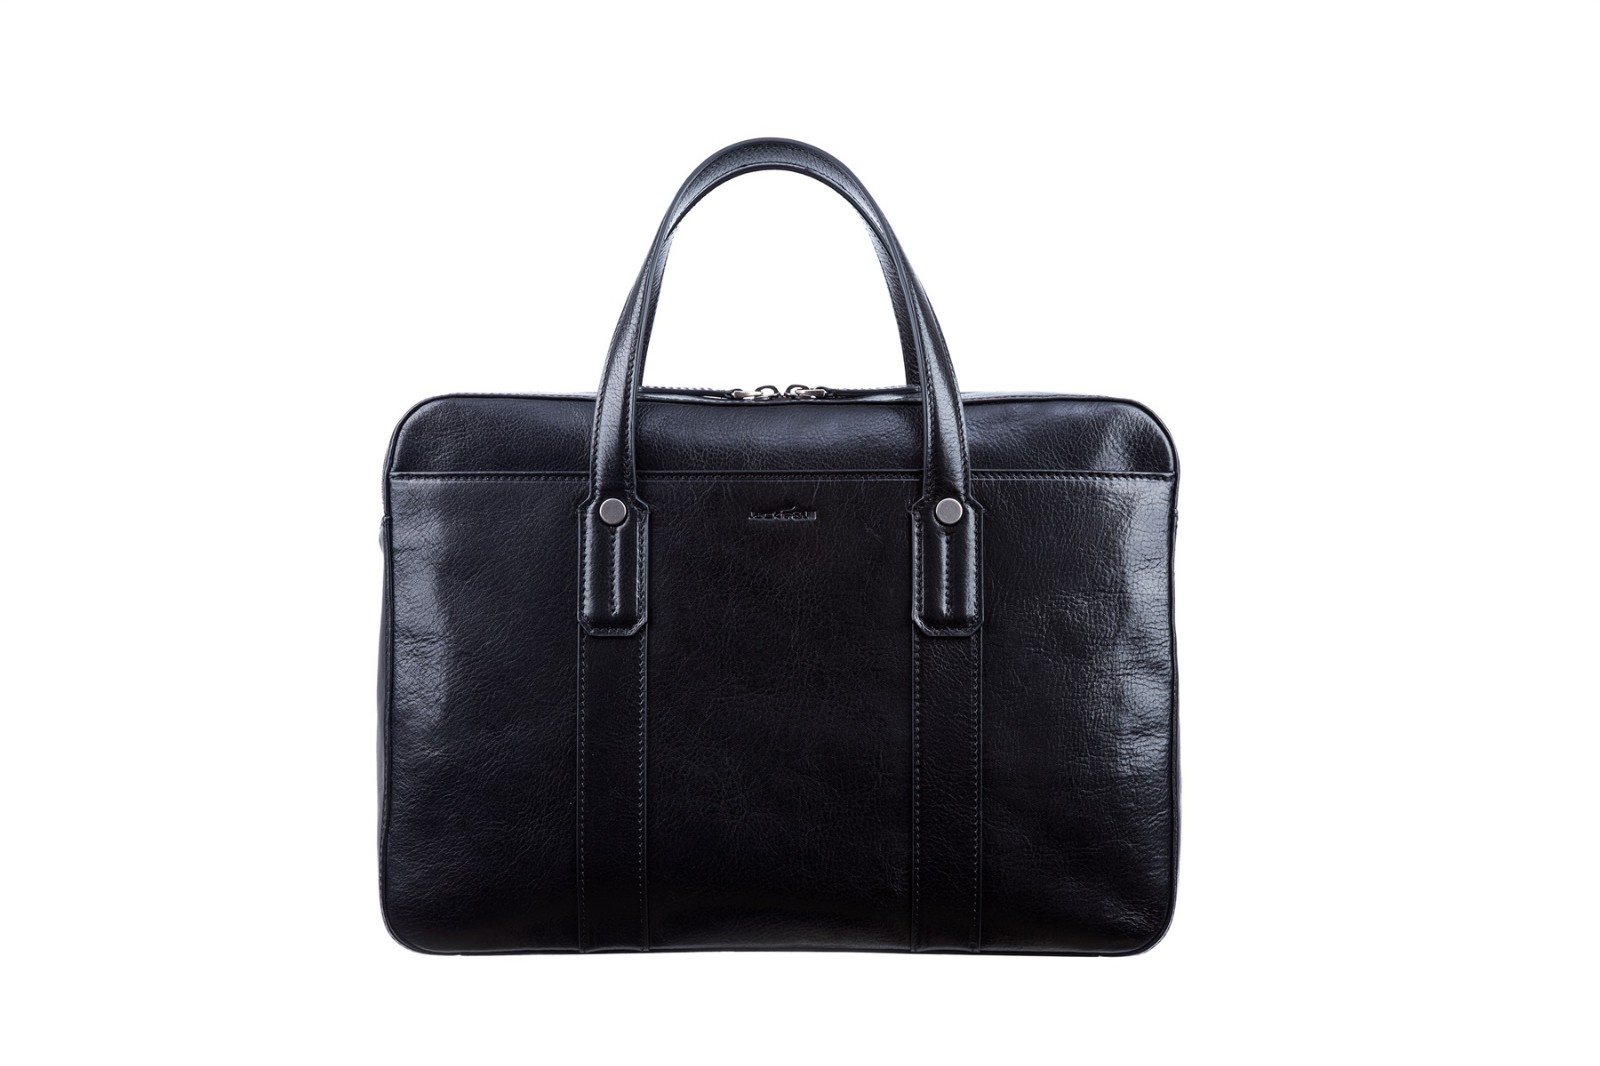 GF bags-Find Mens Briefcase Bag Professional Briefcase From Gaofeng Bags